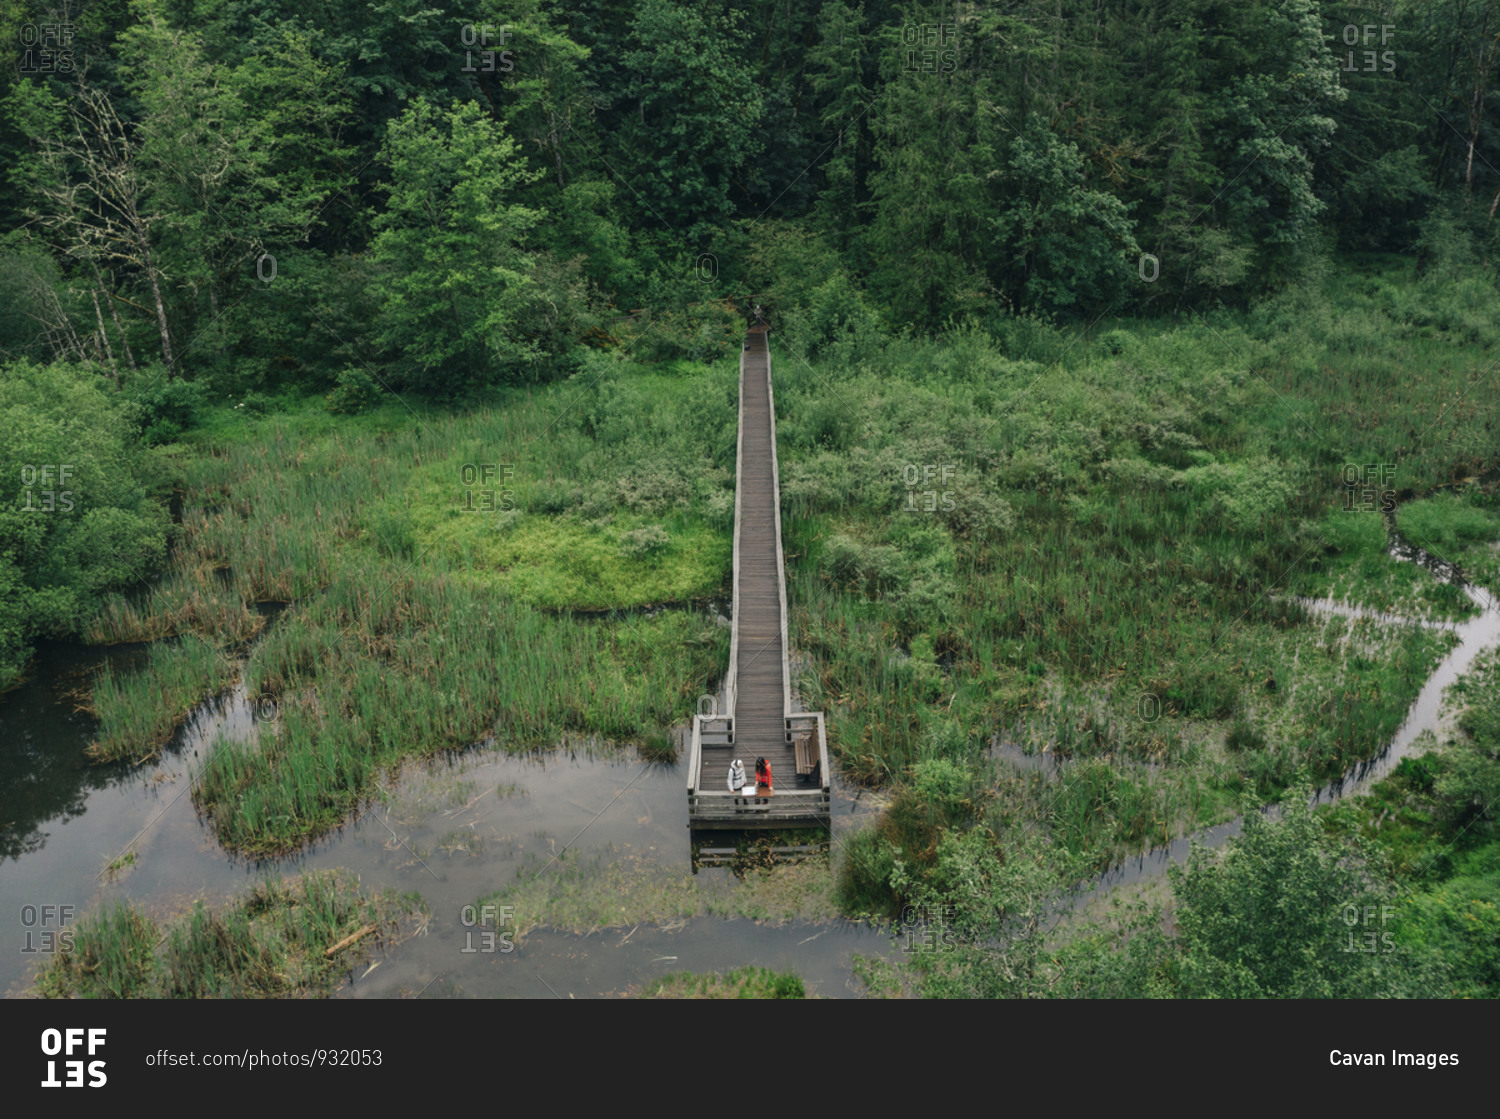 A young couple enjoys a hike on a boardwalk in the Pacific Northwest.